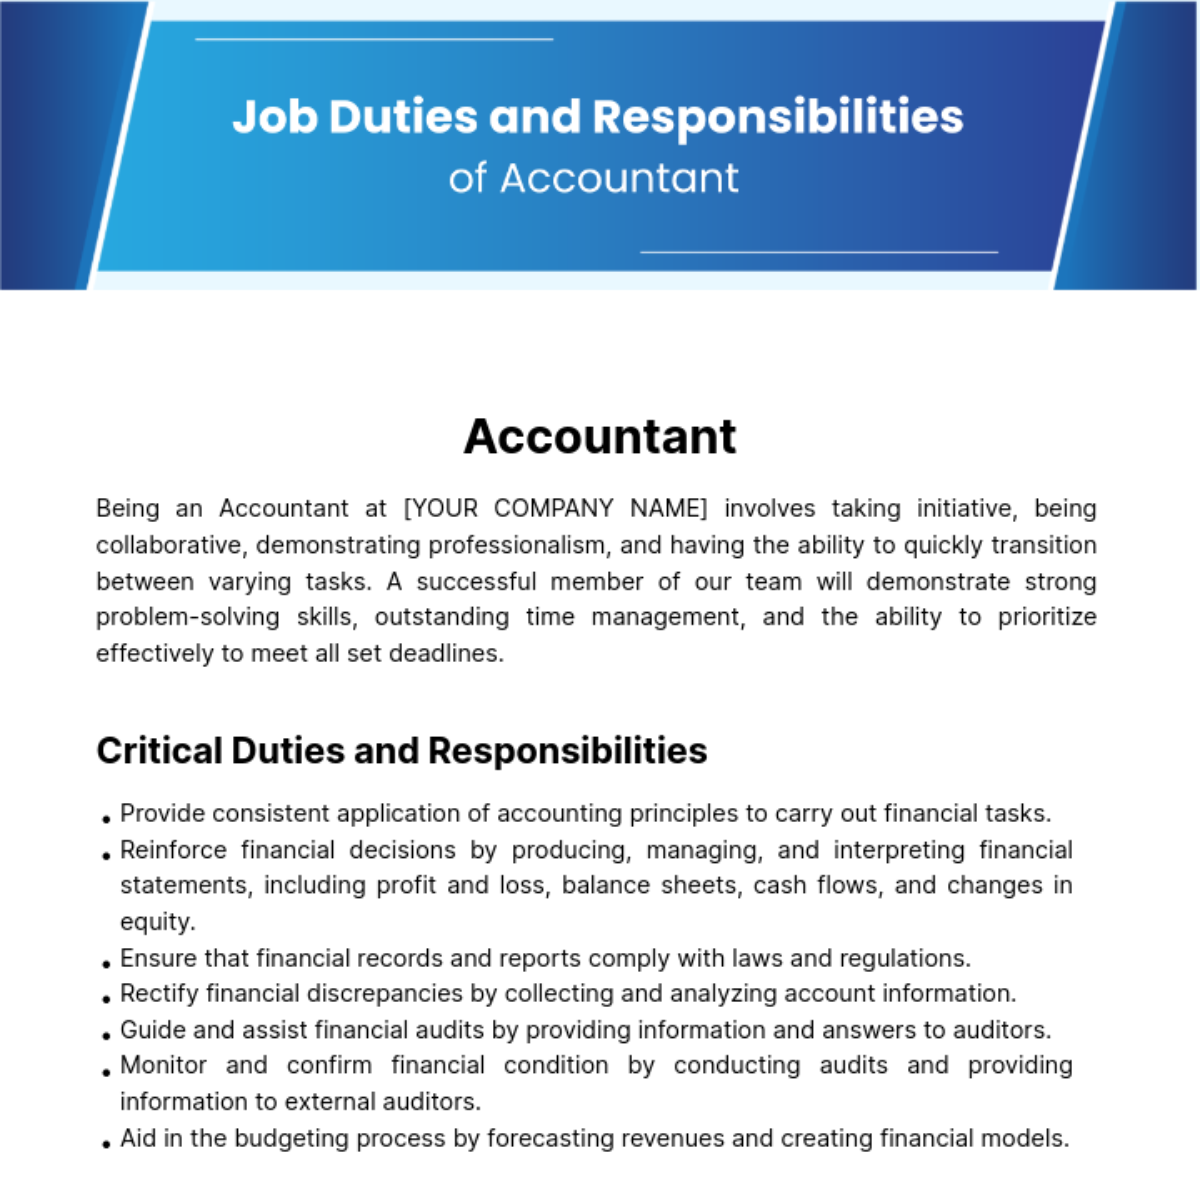 Free Job Duties and Responsibilities of Accountant Template